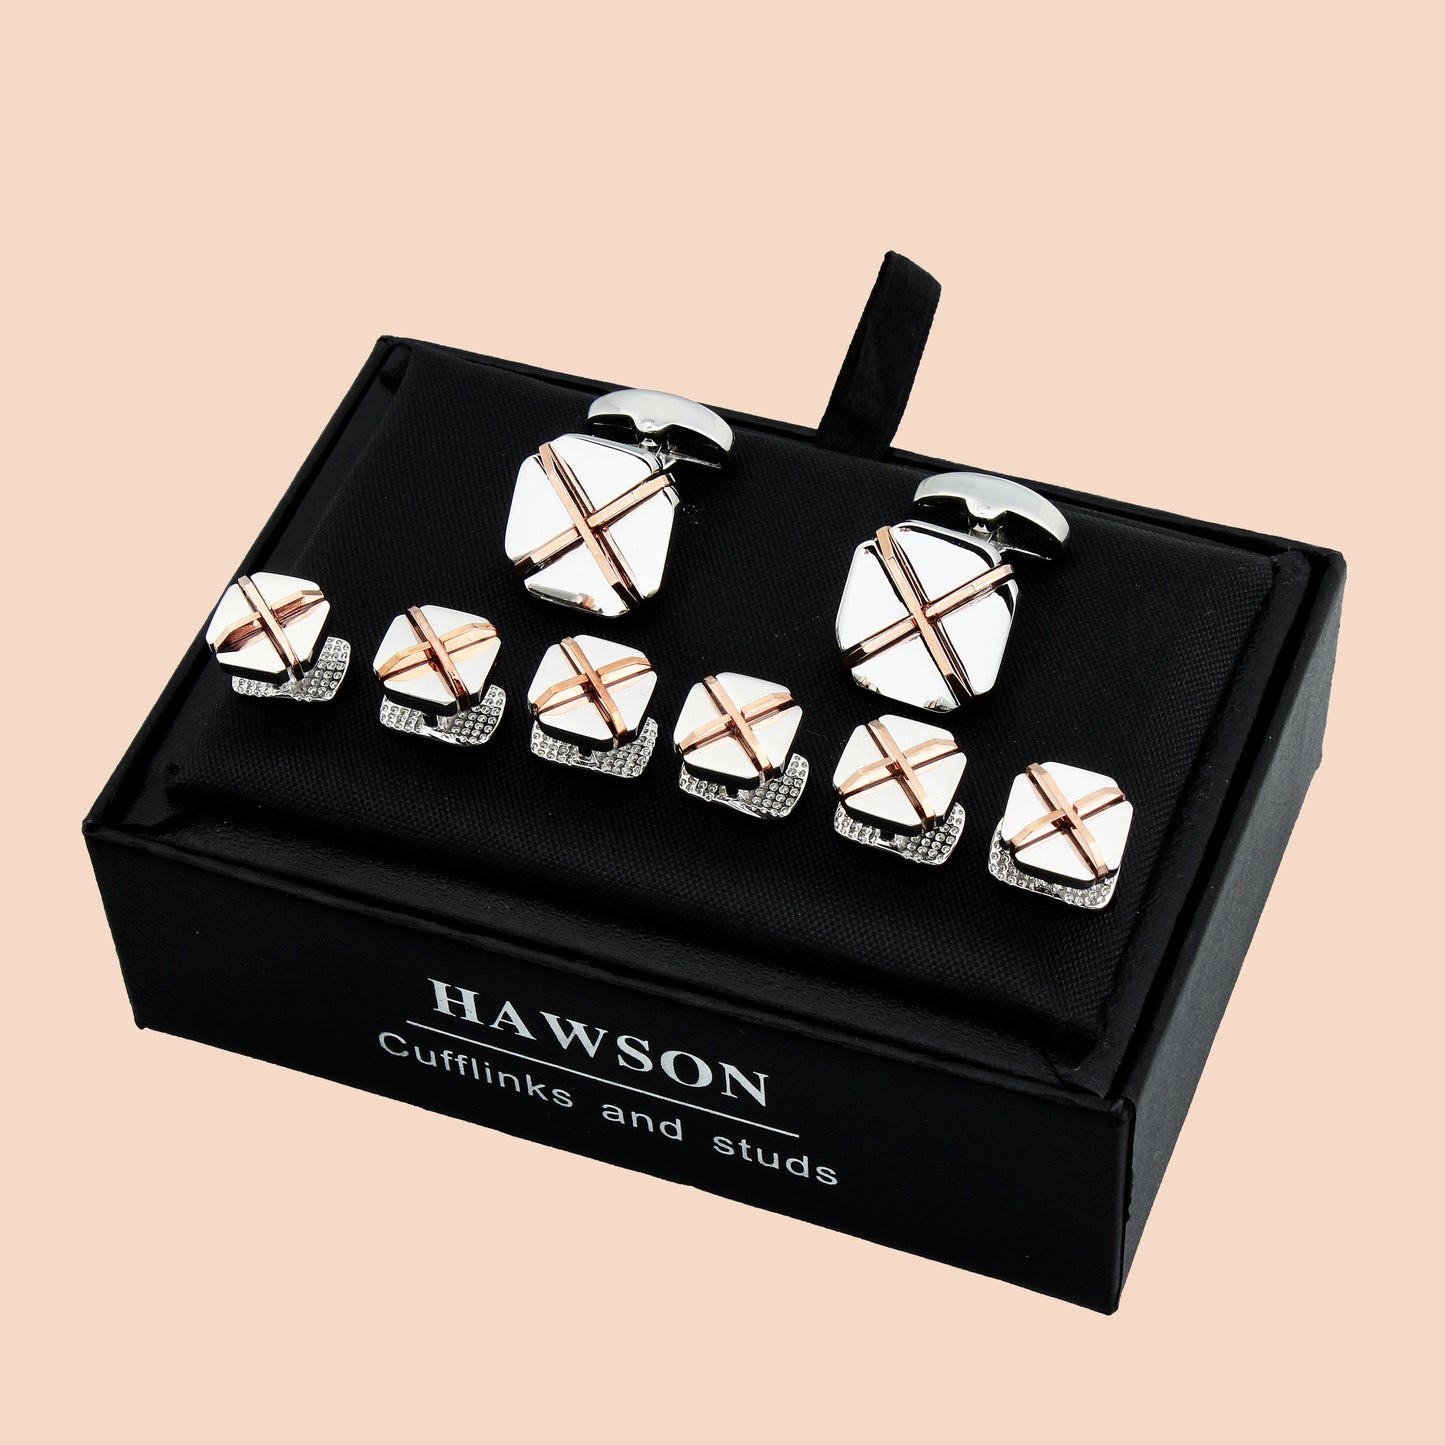 HAWSON X-Shape and Square Cufflinks and Studs Set for Men